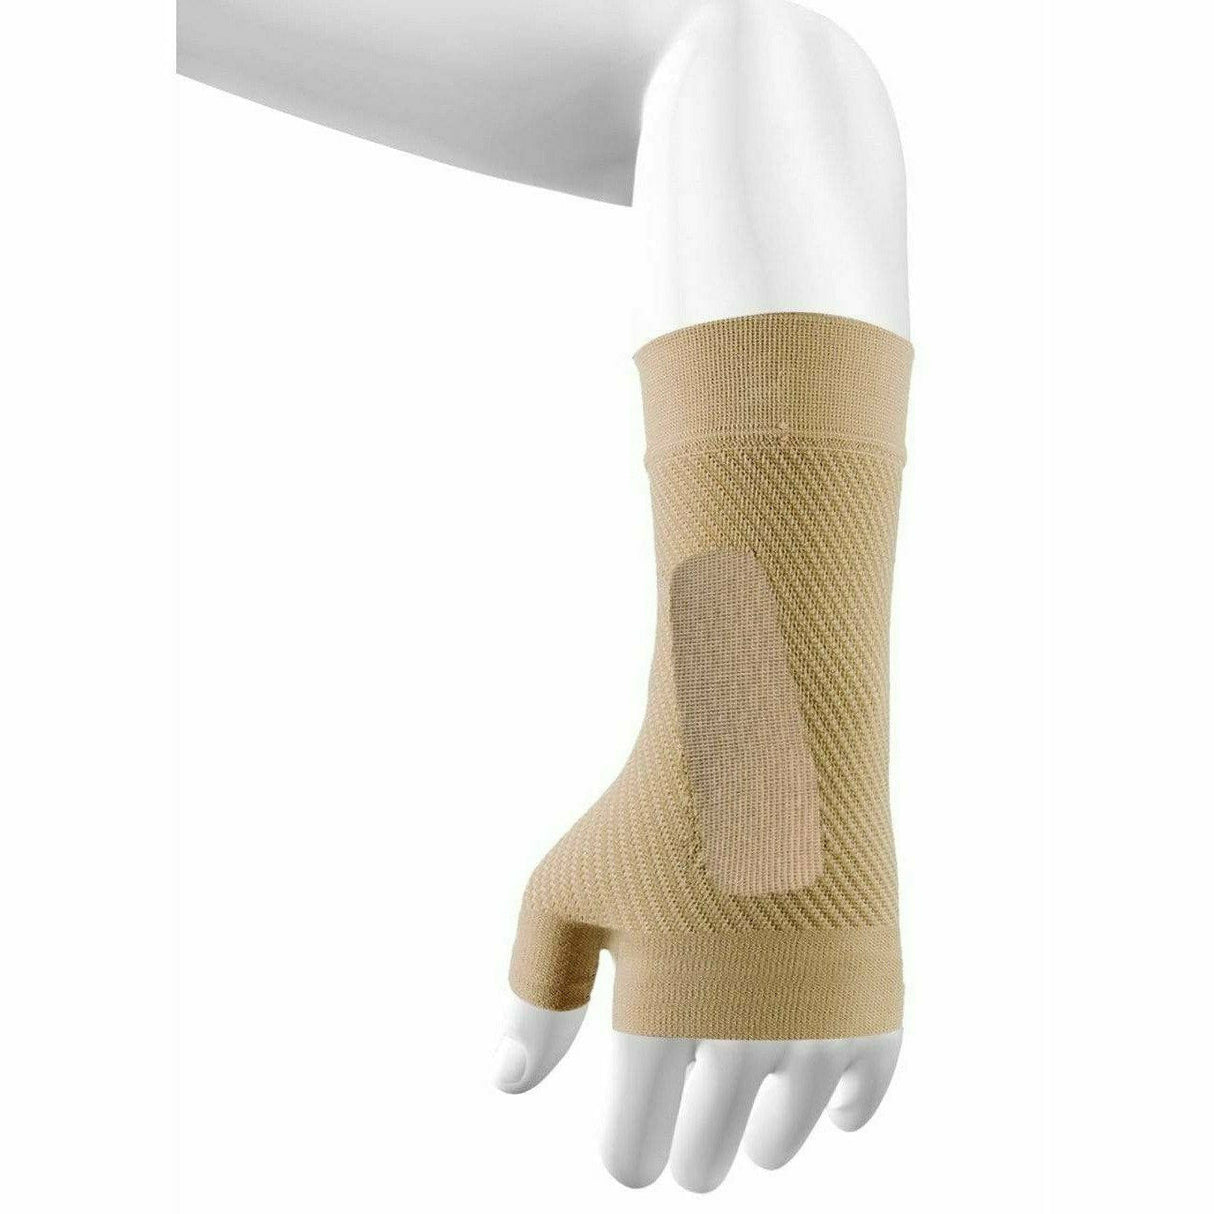 OS1st WS6 Performance Wrist Sleeve  -  Small / Natural